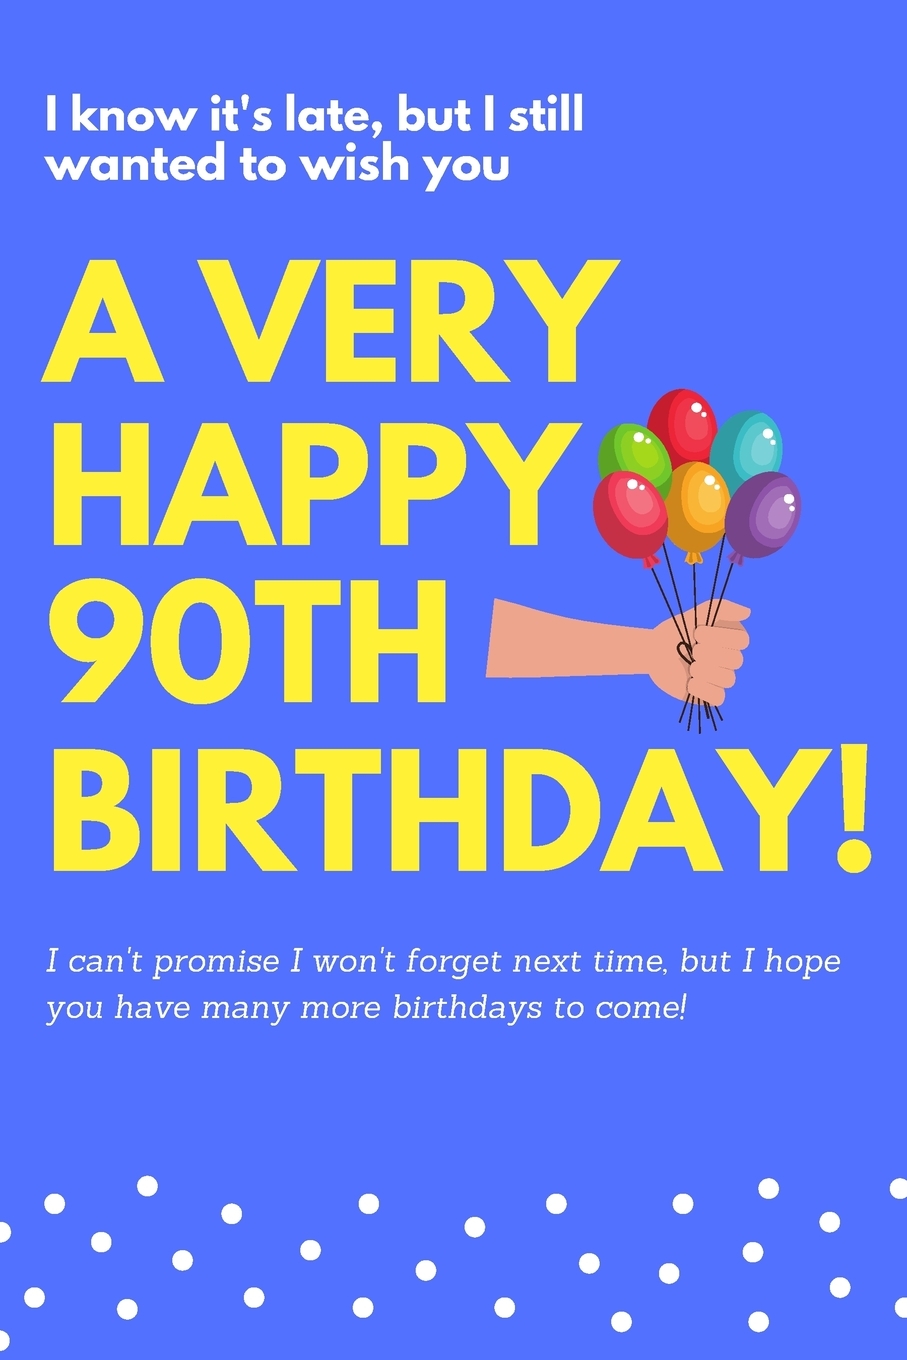 i-know-it-s-late-but-i-still-wanted-to-wish-you-a-very-happy-90th